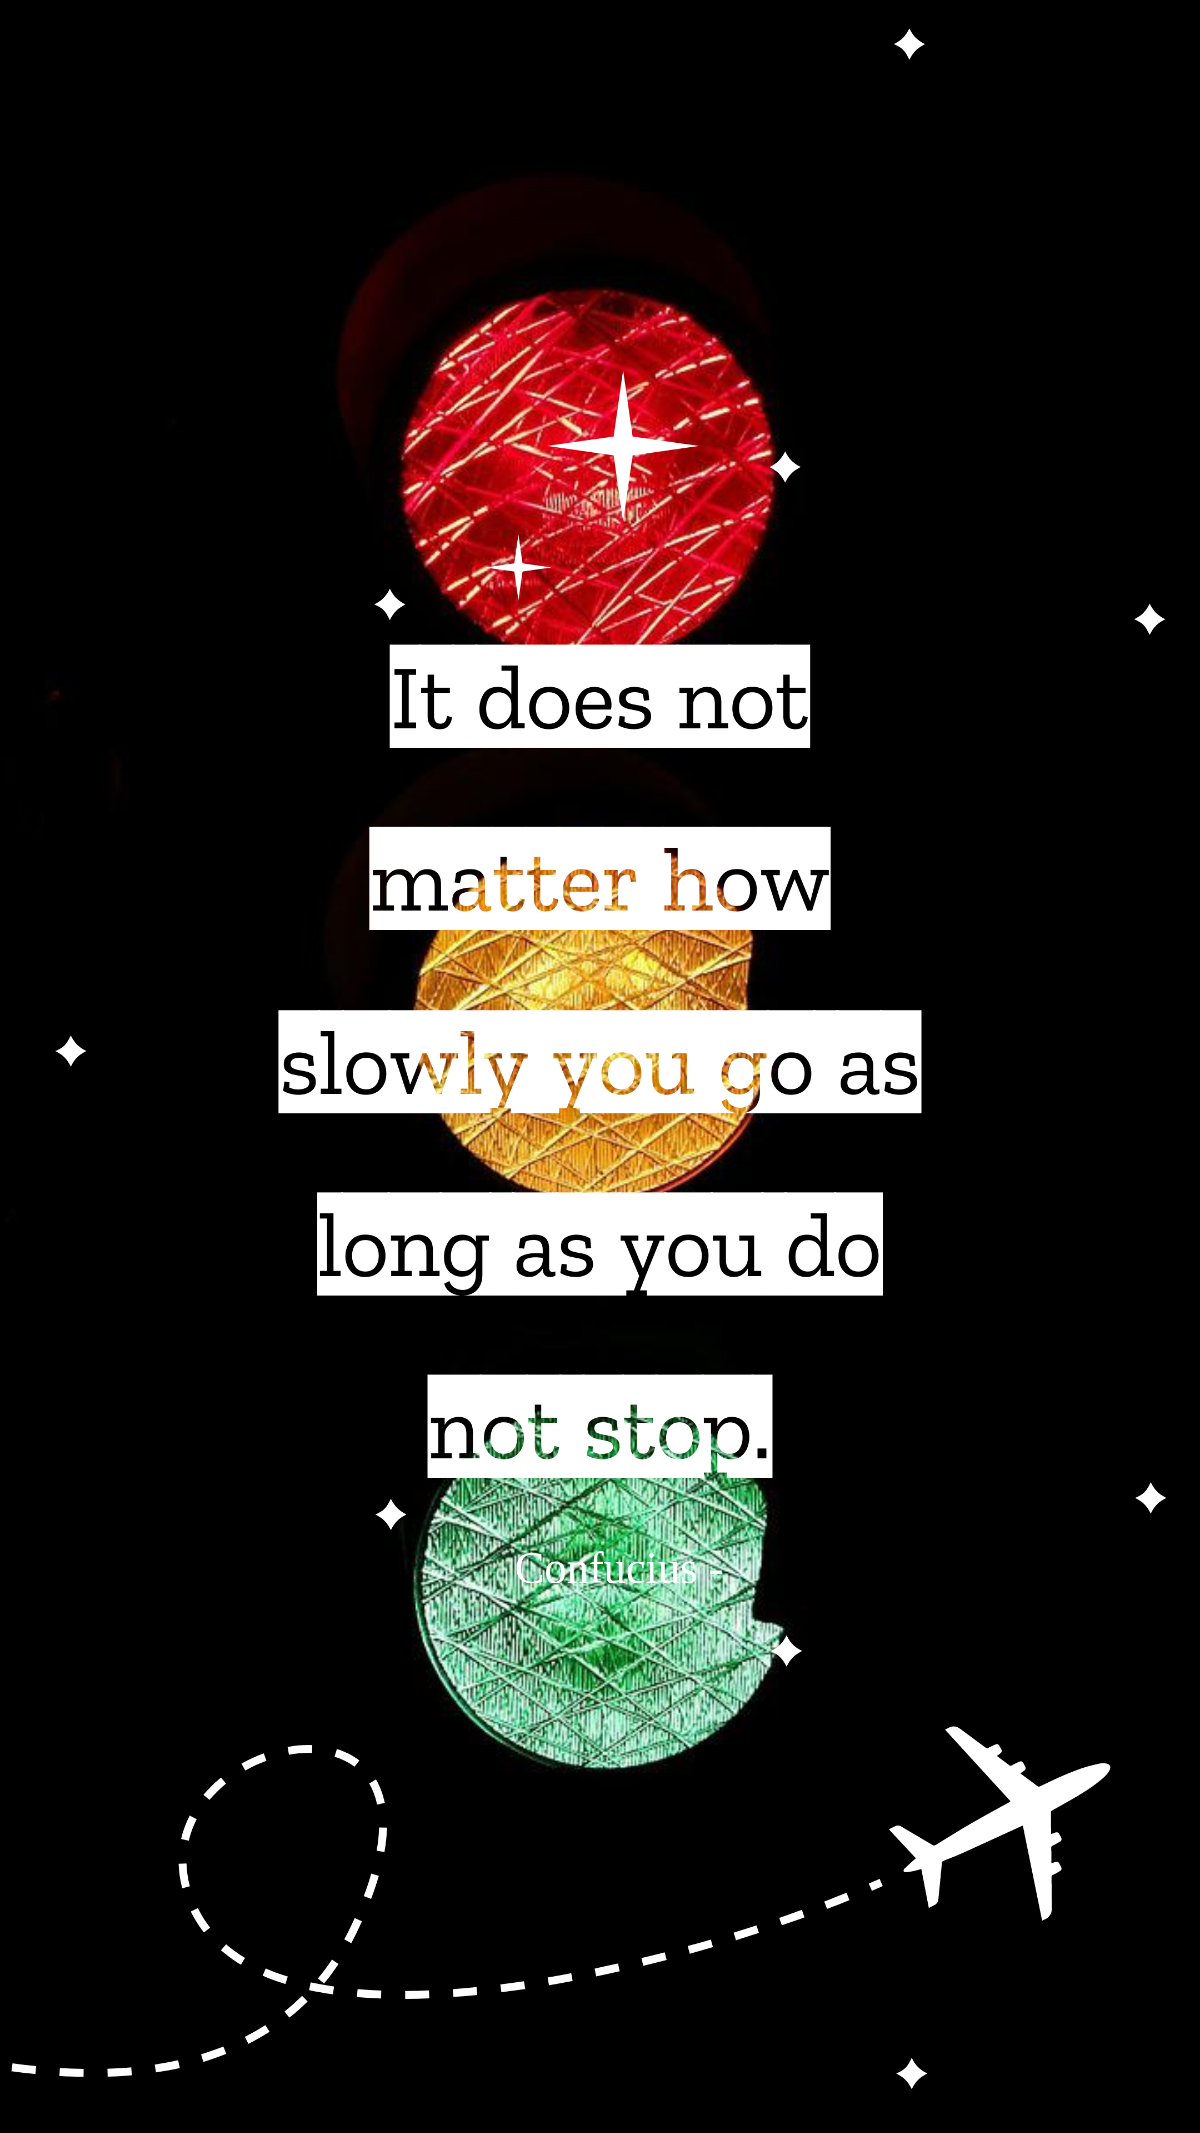 Confucius - It does not matter how slowly you go as long as you do not stop. Template